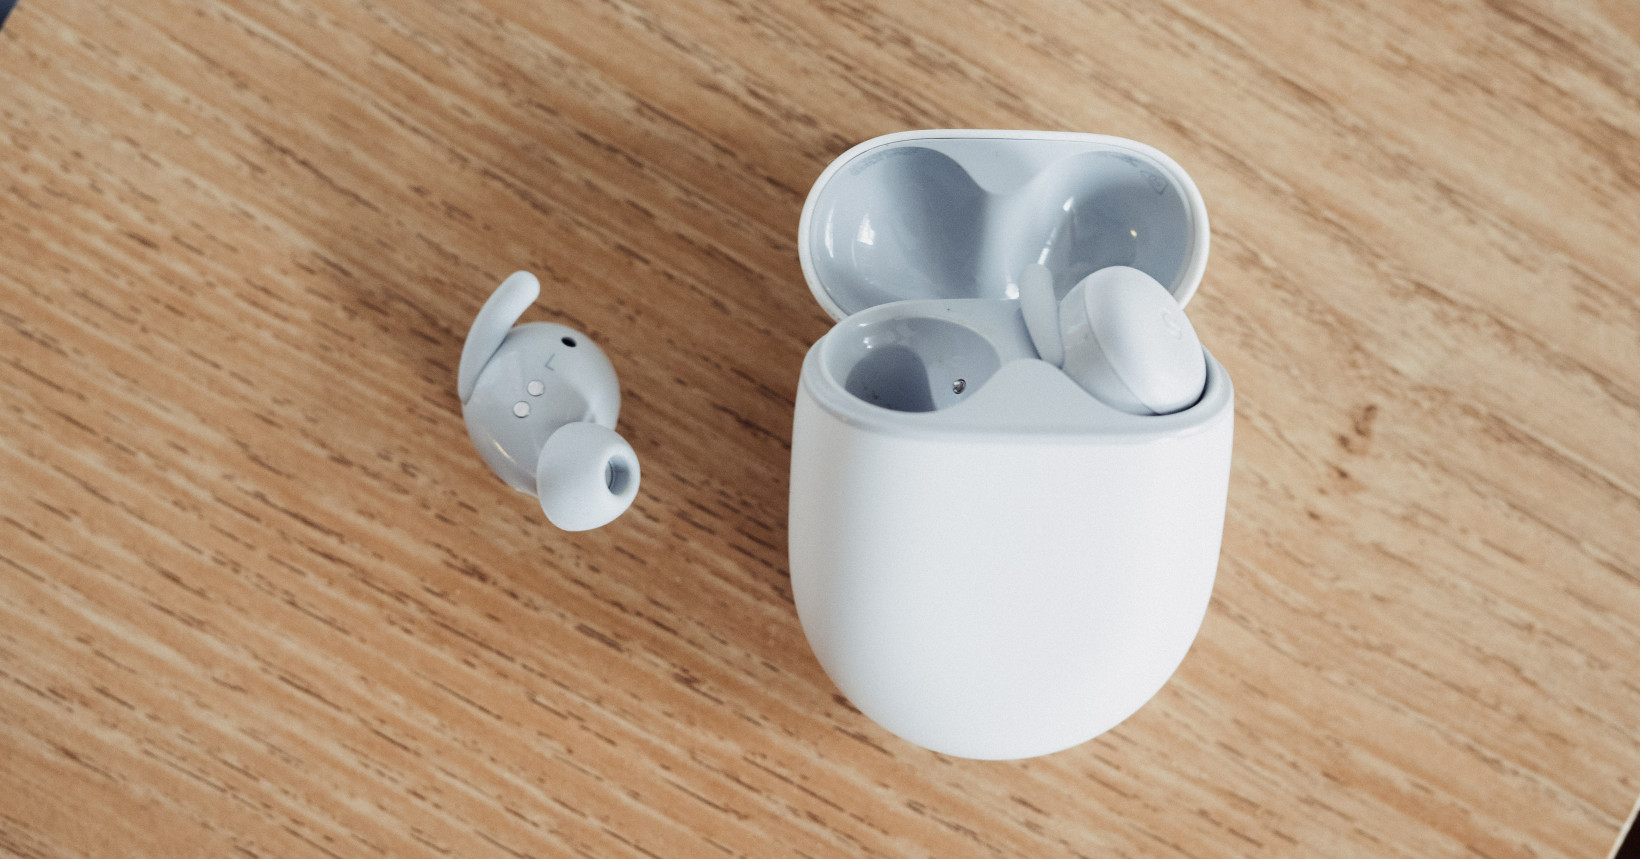 Why The Pixel Buds Pro Are My Favourite Earbuds